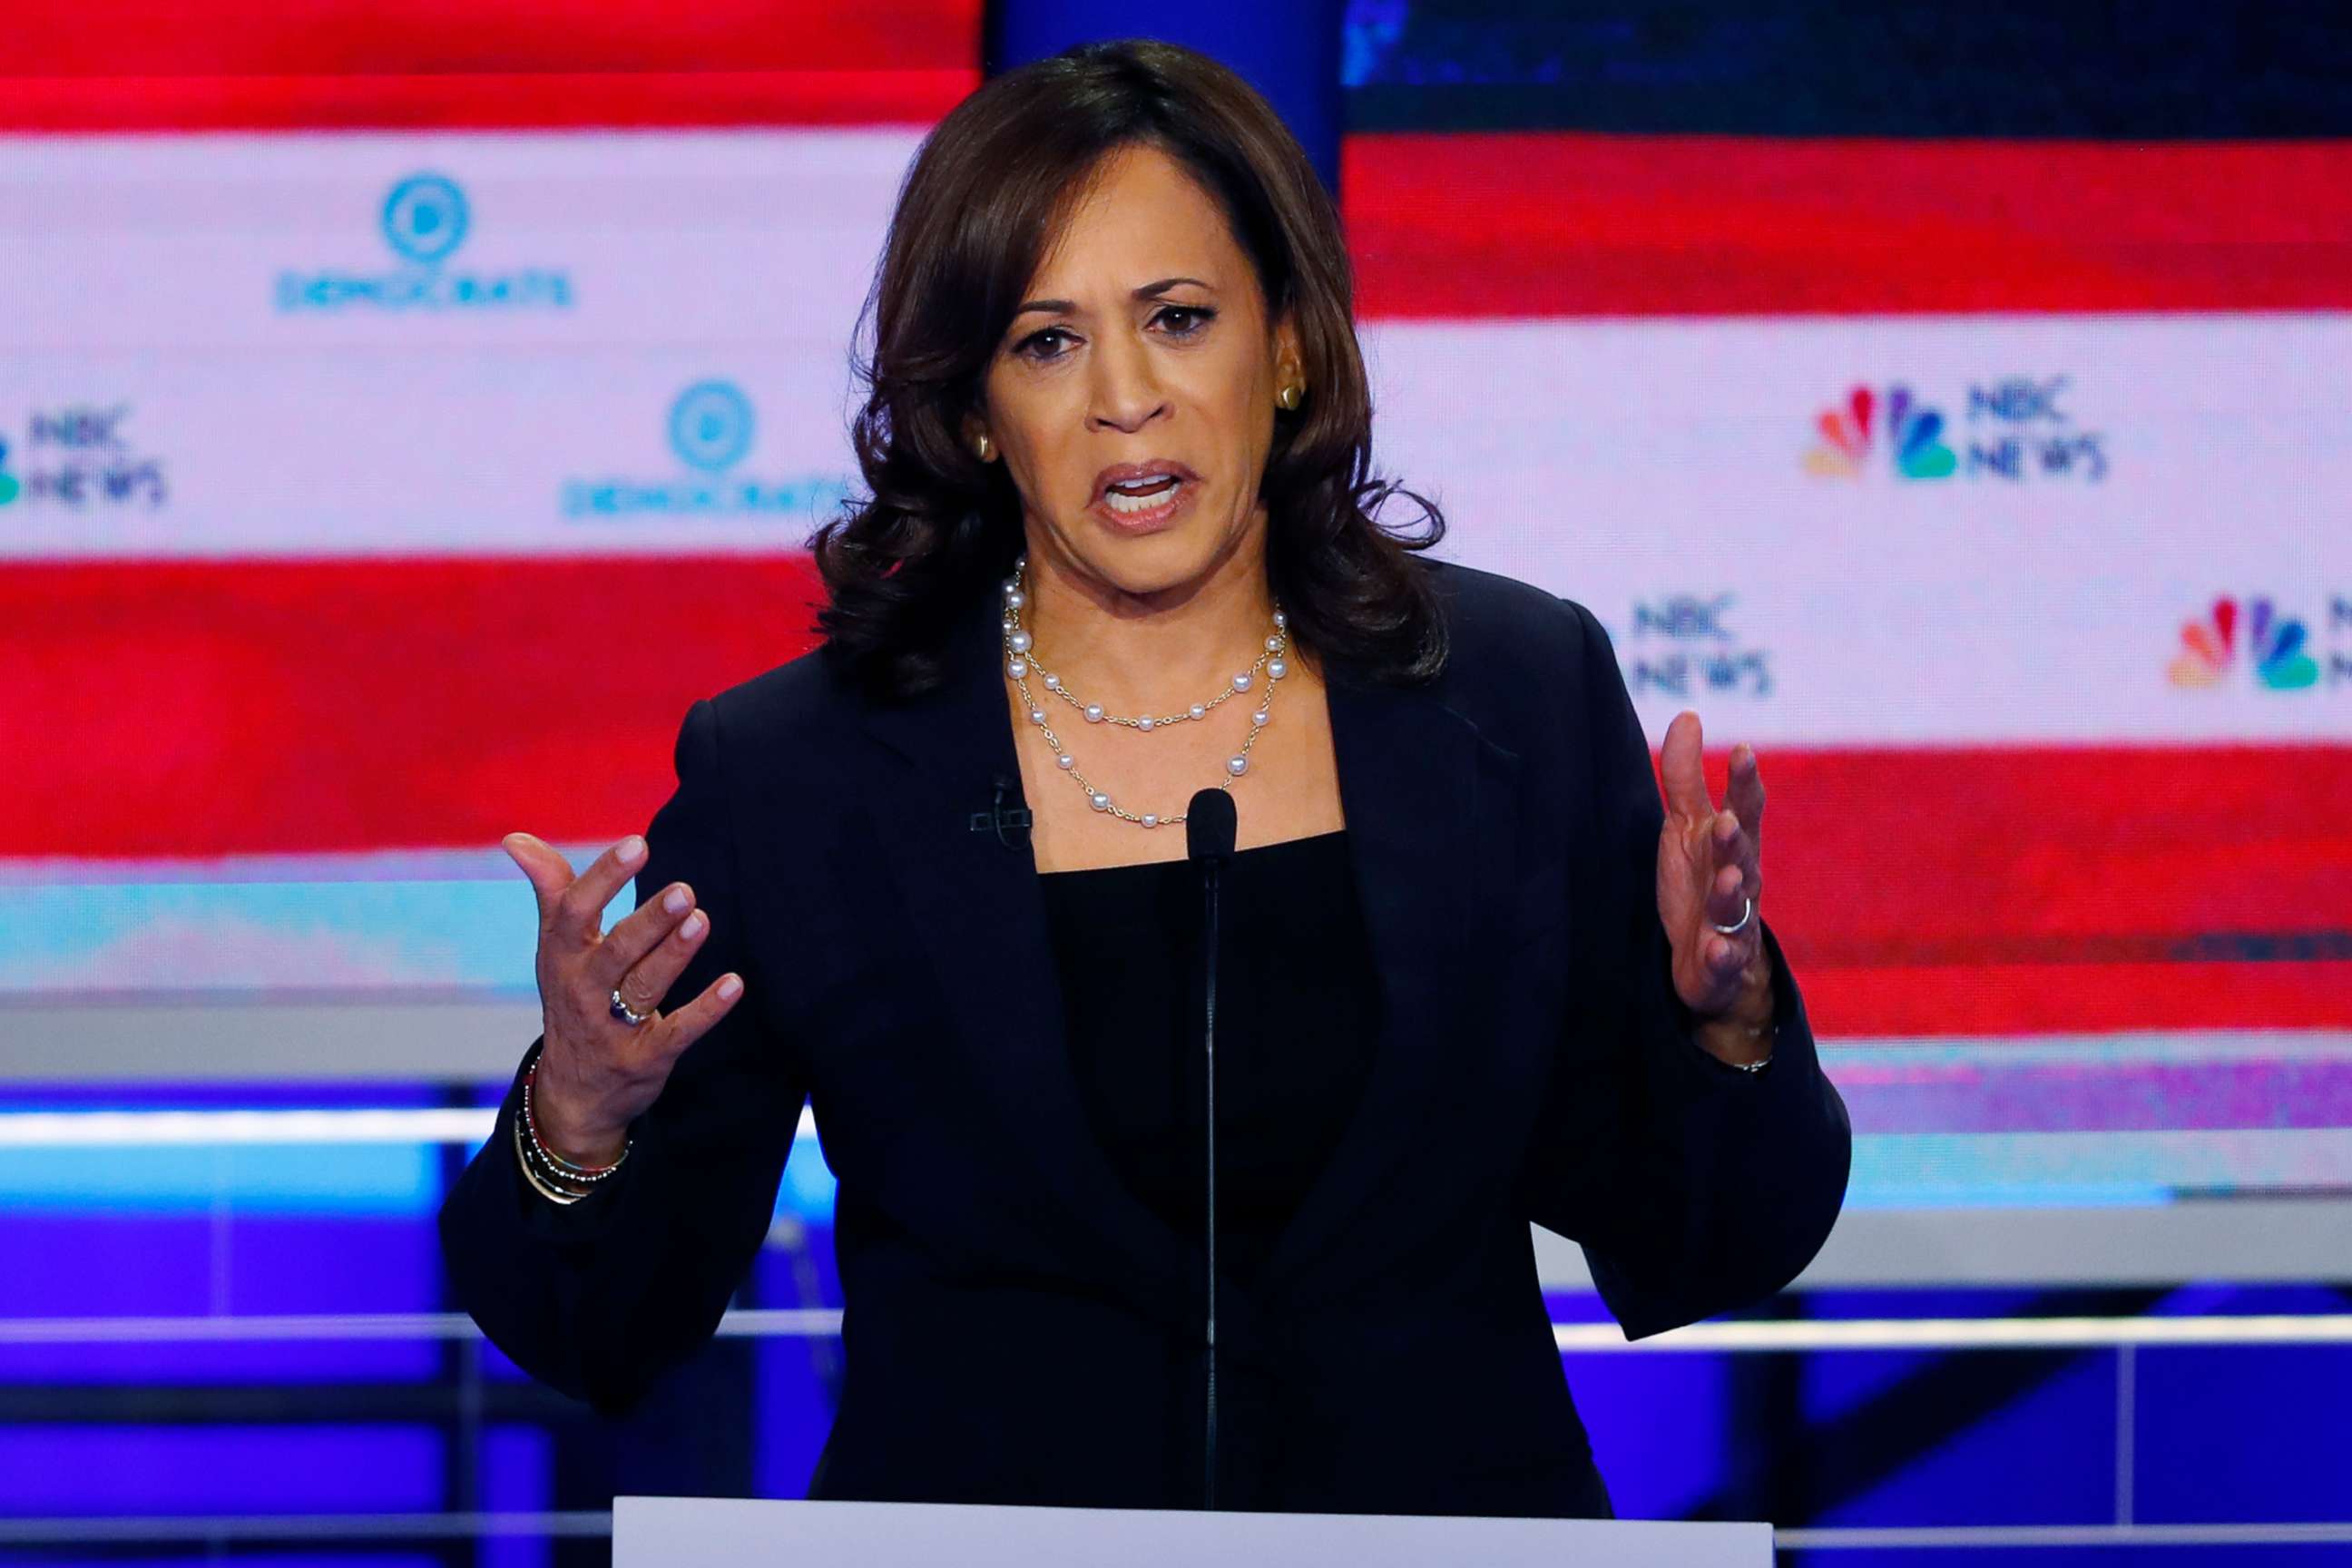 PHOTO: Kamala Harris participates in the second night of the first 2020 democratic presidential debate at the Adrienne Arsht Center for the Performing Arts in Miami, June 27, 2019.